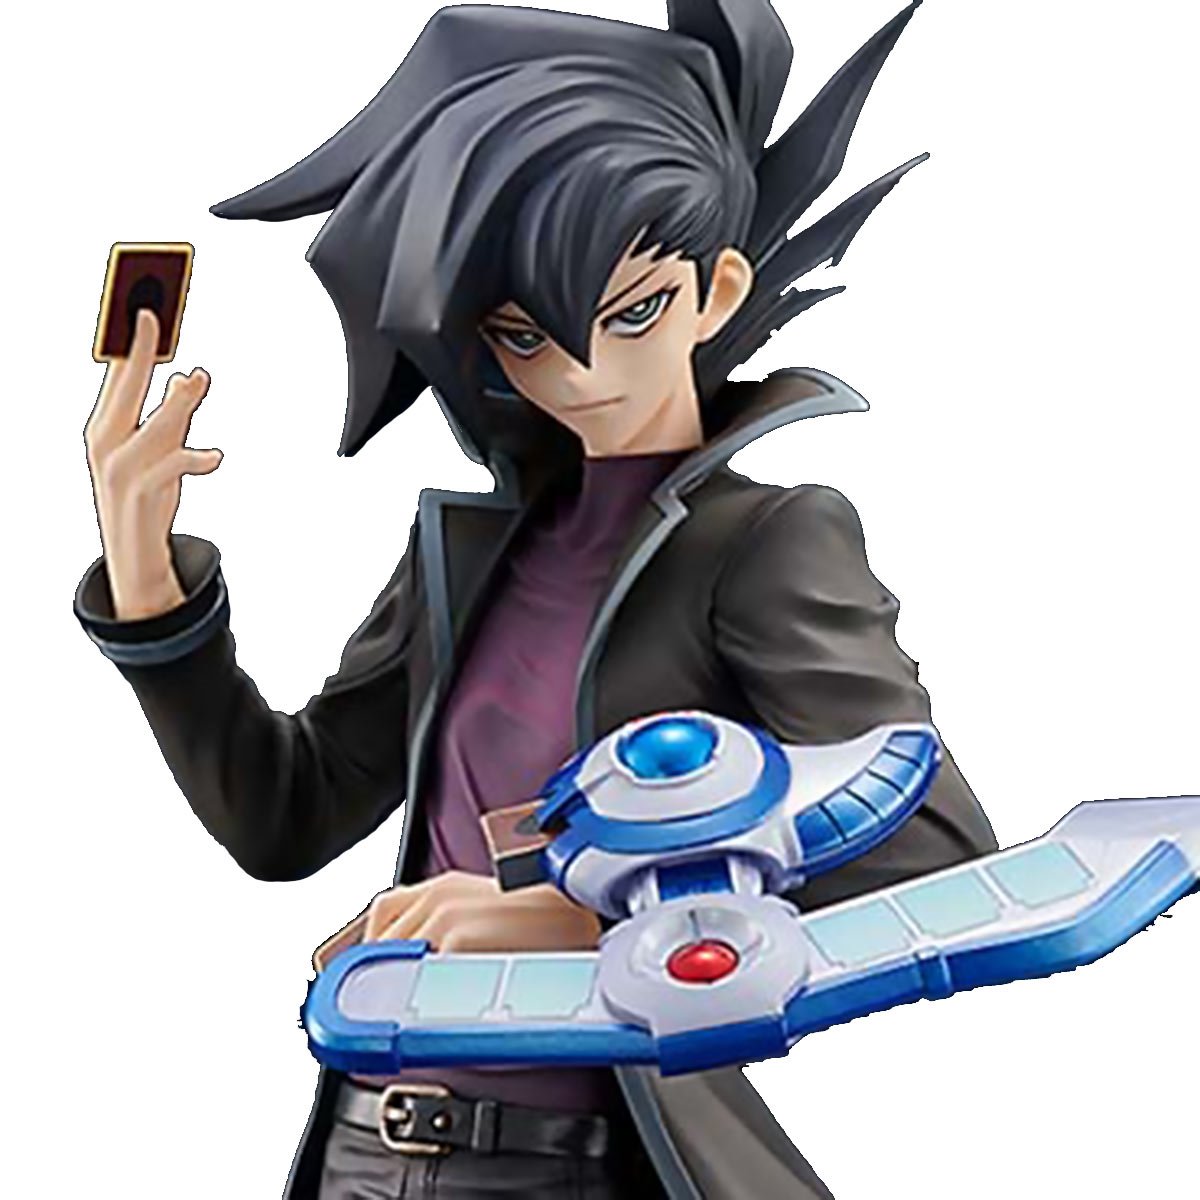 YuGiOh figures and goods